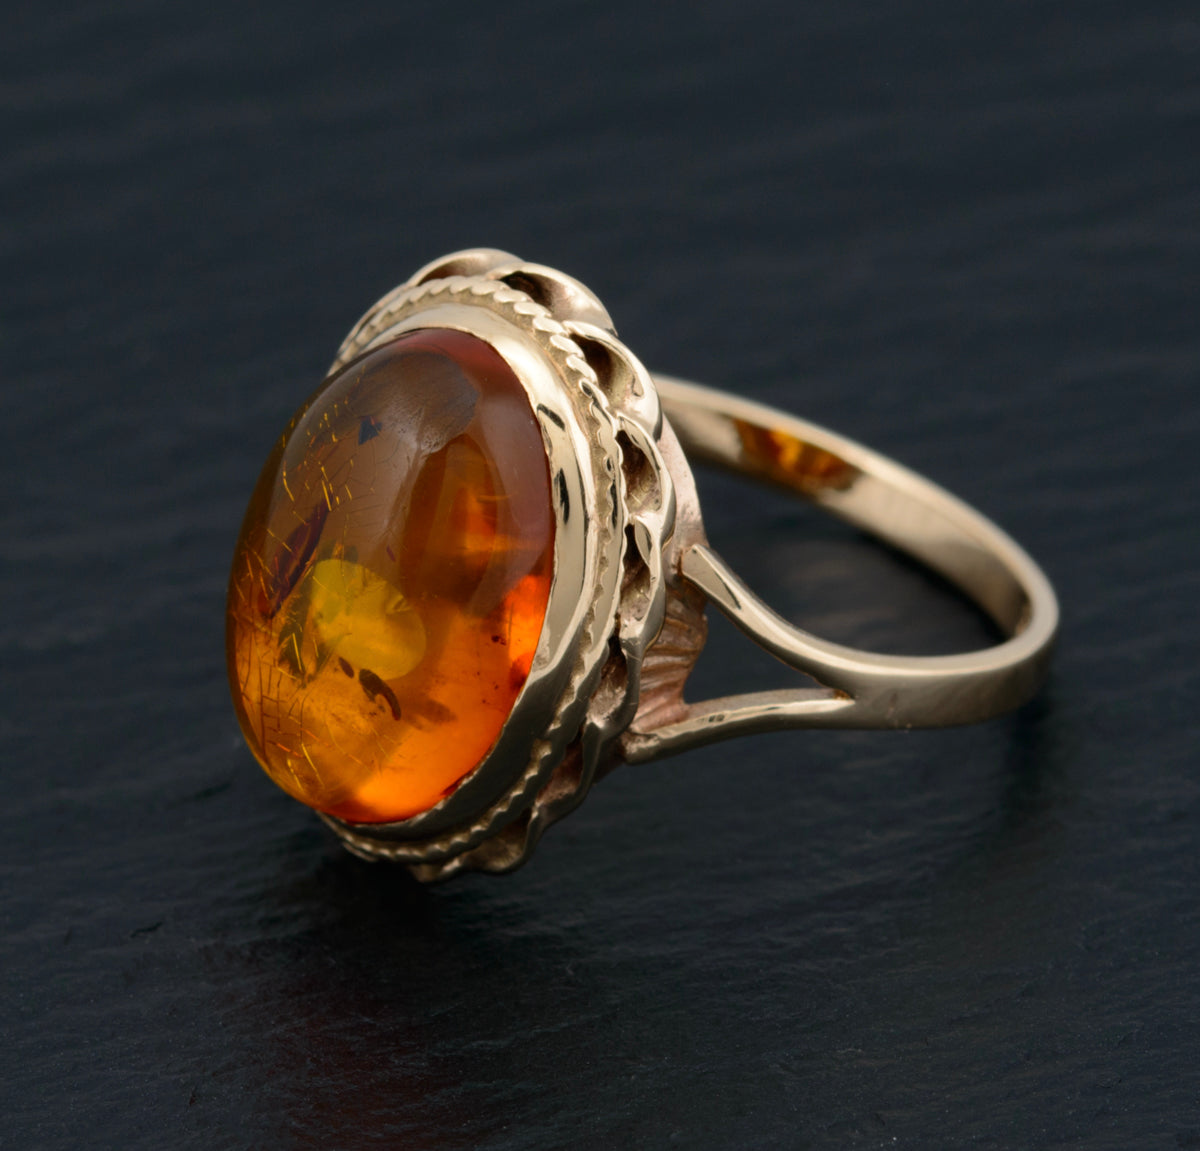 Vintage 9ct Yellow Gold Ring With Polished Amber Cabochon 1960's Retro (A1467)